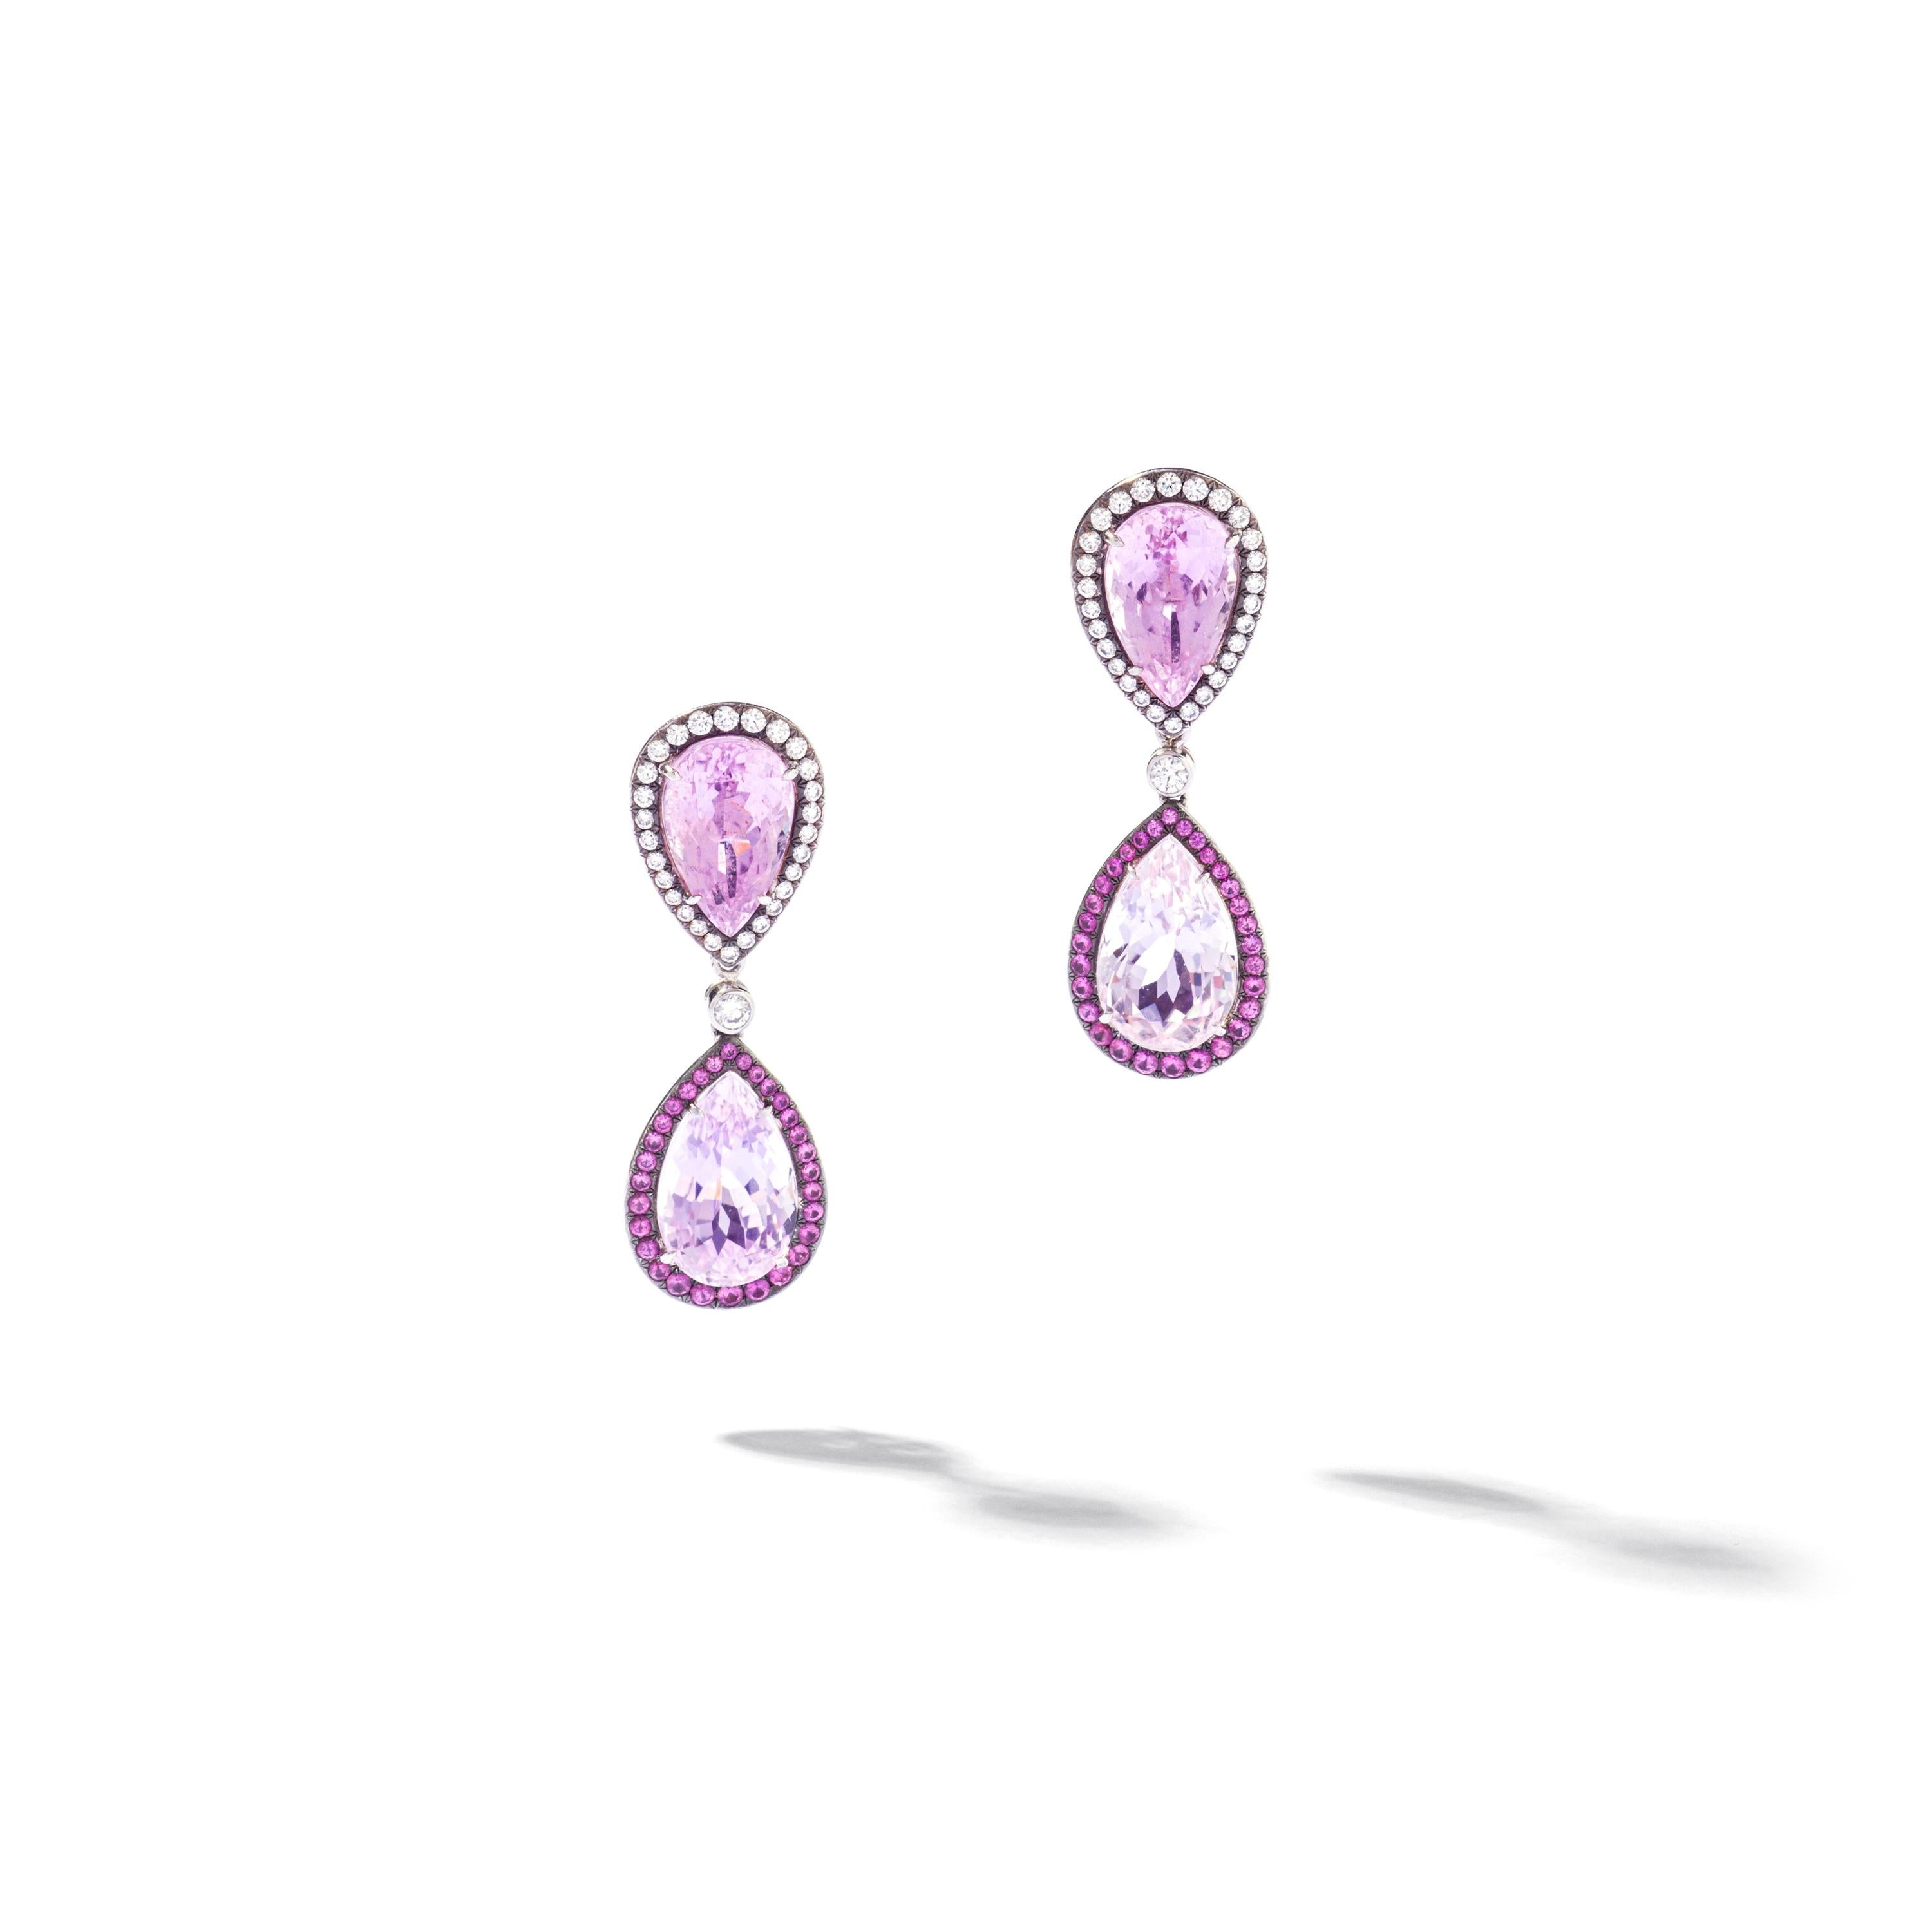 Diamond Kunzite and Pink Sapphire White Gold 18k Earrings
Day and Night Pear Shapes. 
Drops are removable the earrings are wearable as studs.

Total height when drop: 1.57 inch (4.00 centimeters).
Total height when stud: 0.67 inch (1.70